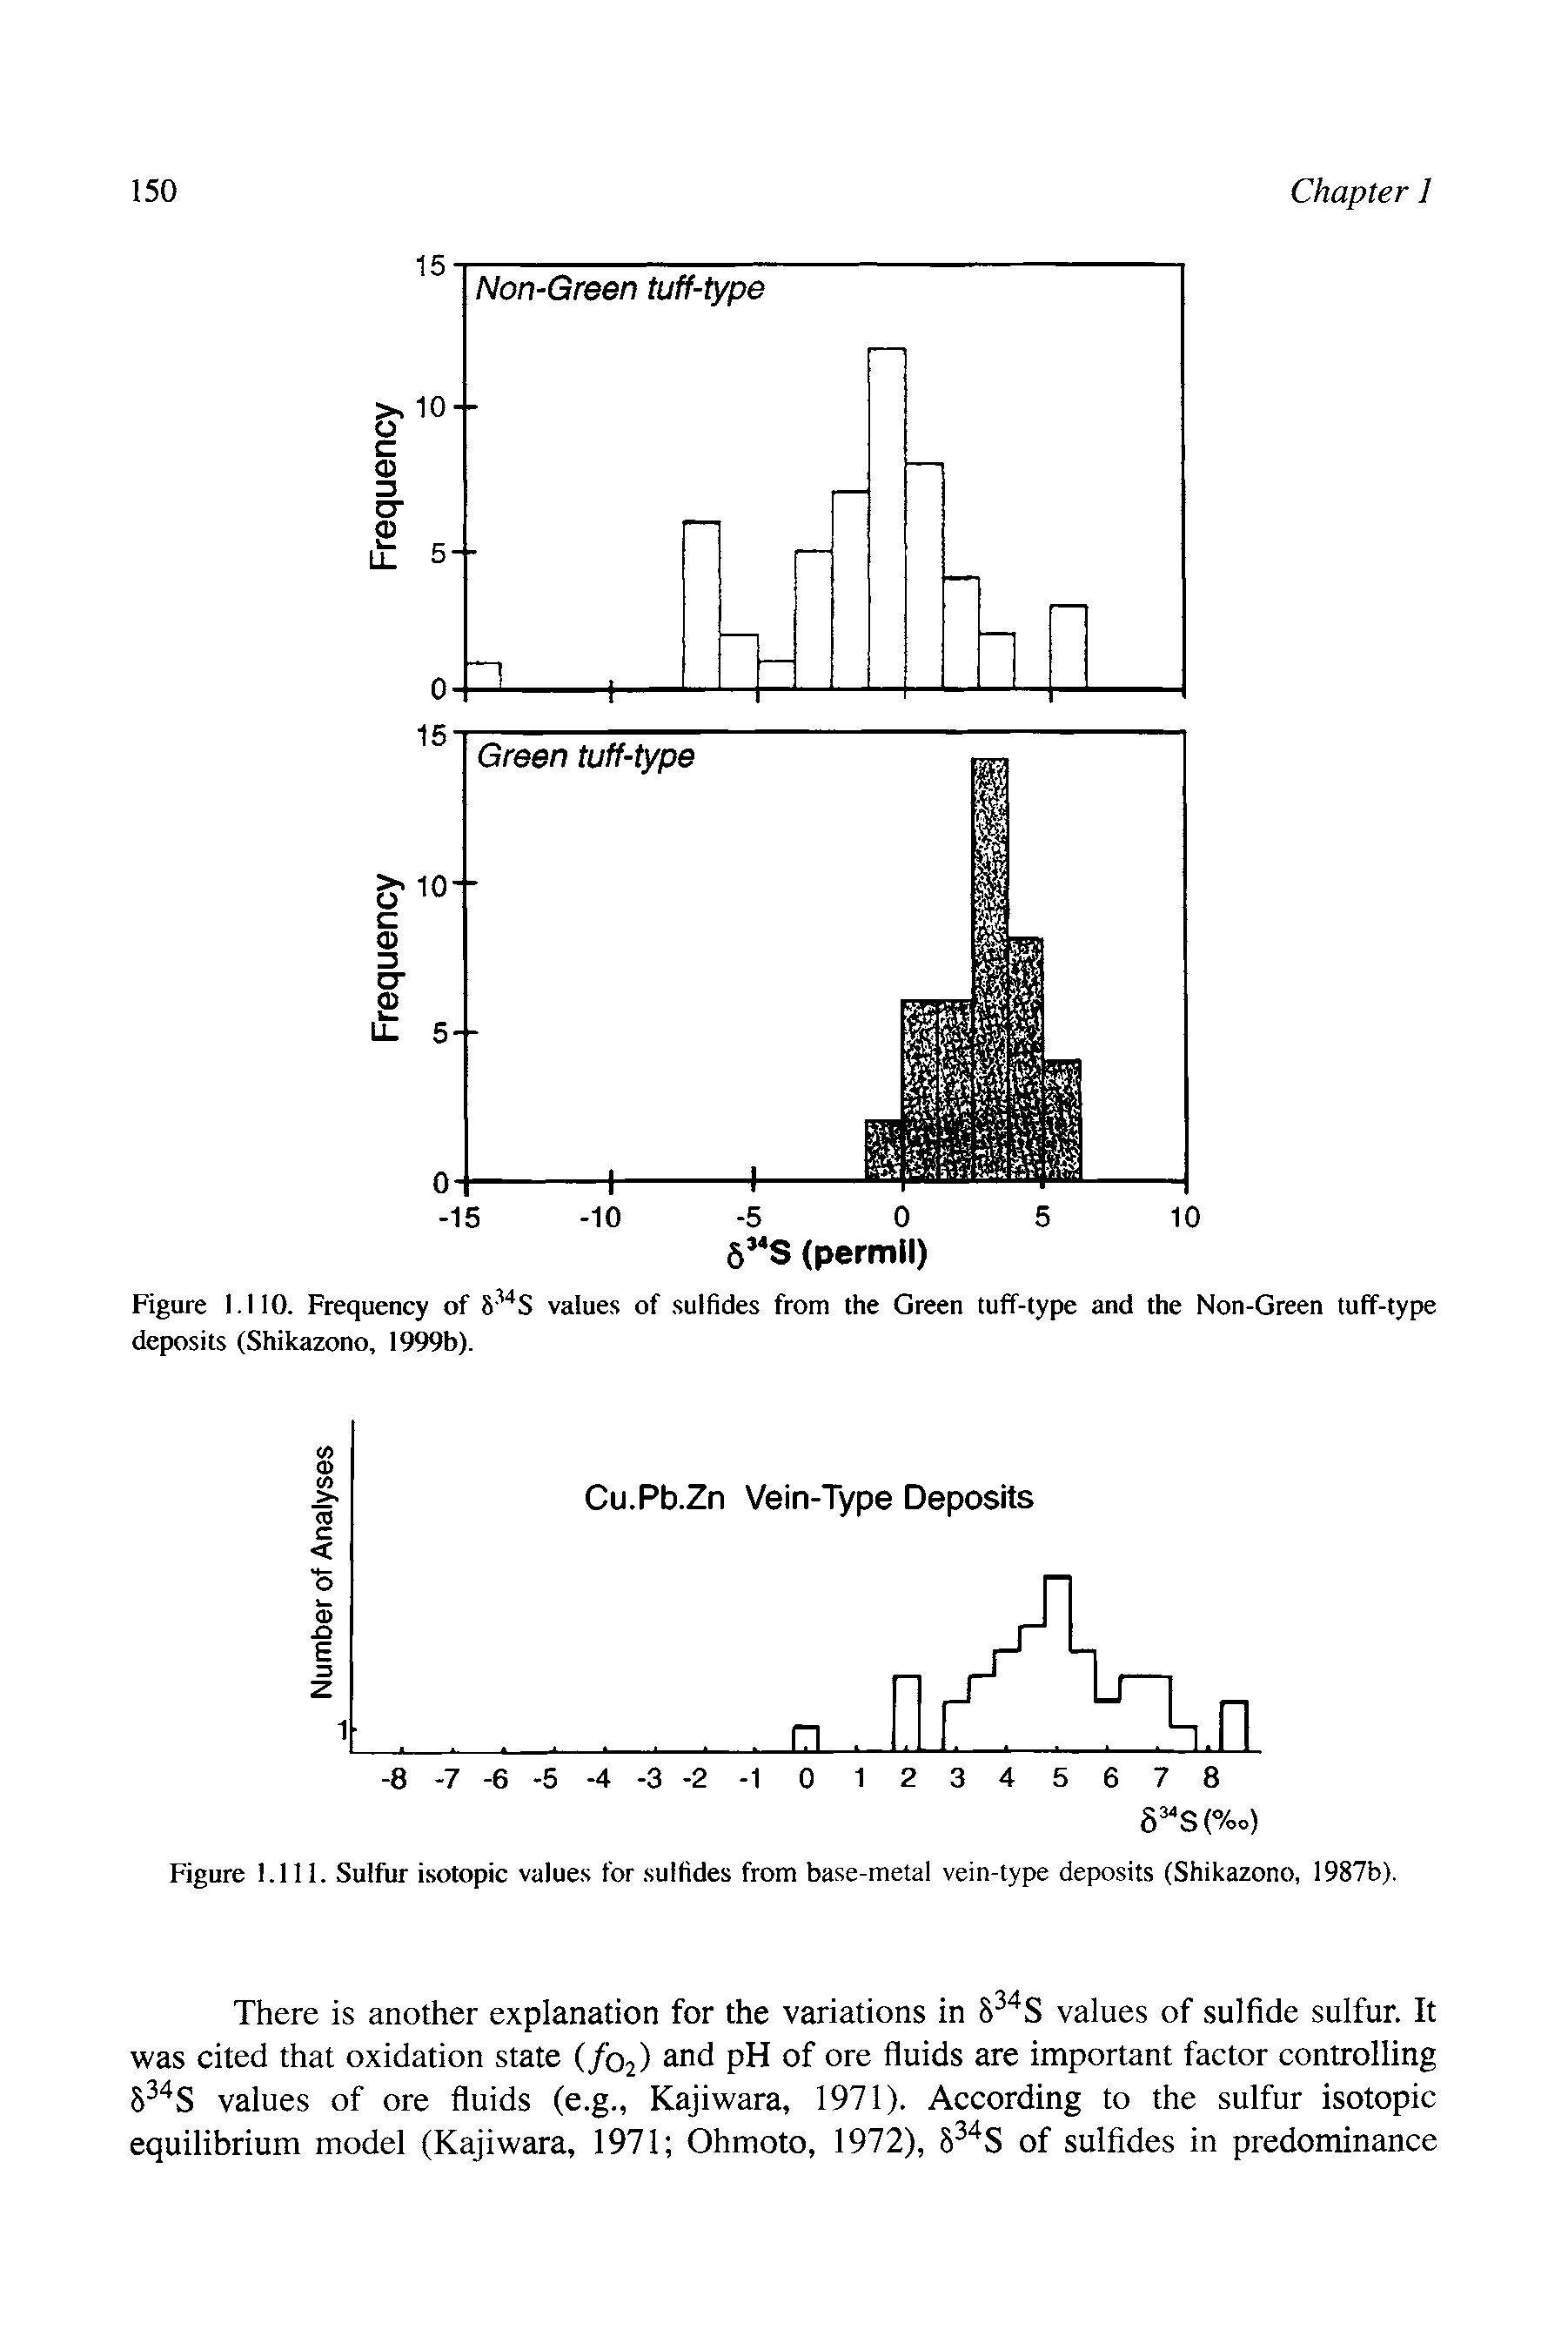 Figure I.IIO. Frequency of values of sulfides from the Green tuff-type and the Non-Green tuff-type deposits (Shikazono, 1999b).